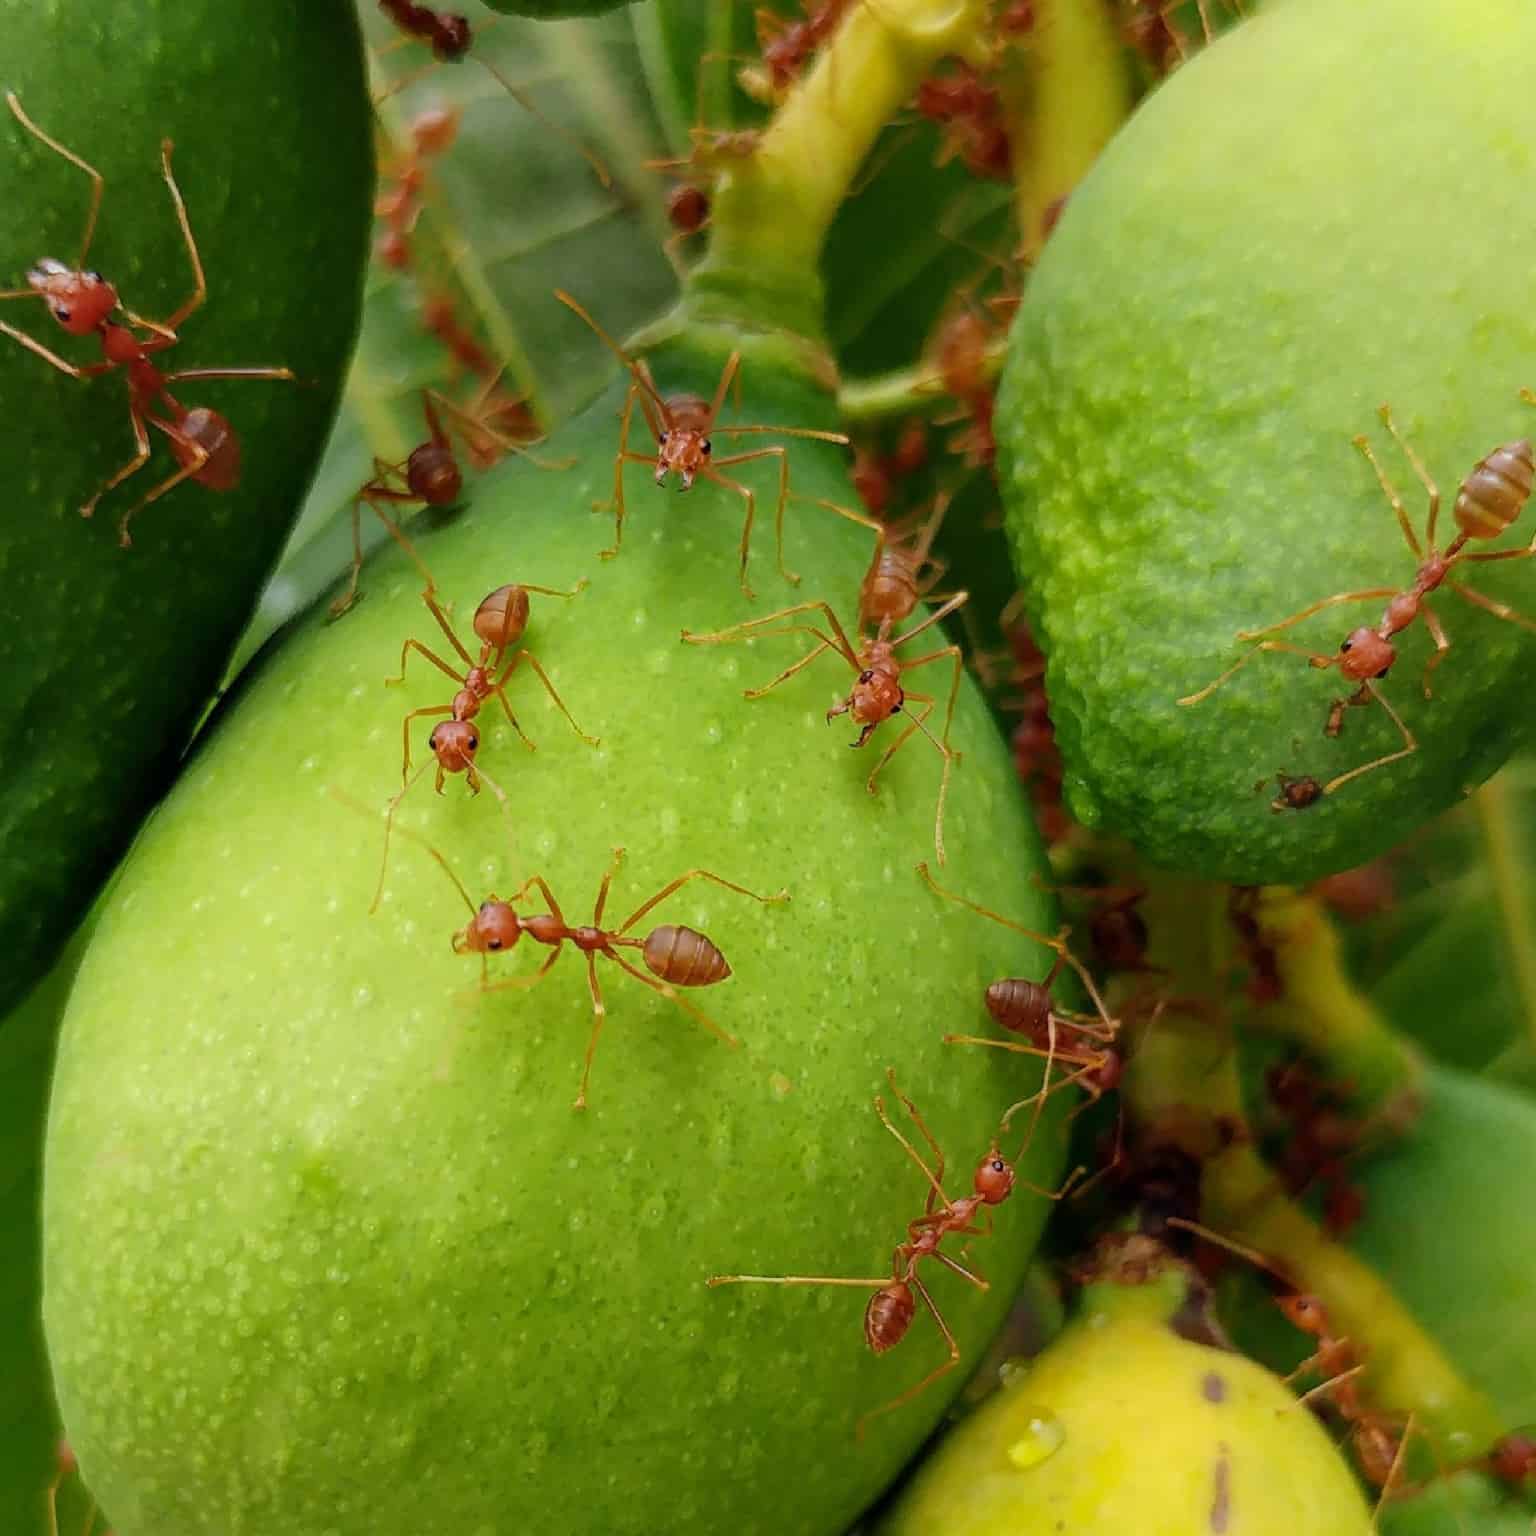 Staying Ahead of the Fire Ant Wars in the South - Strategies & Natural Treatments